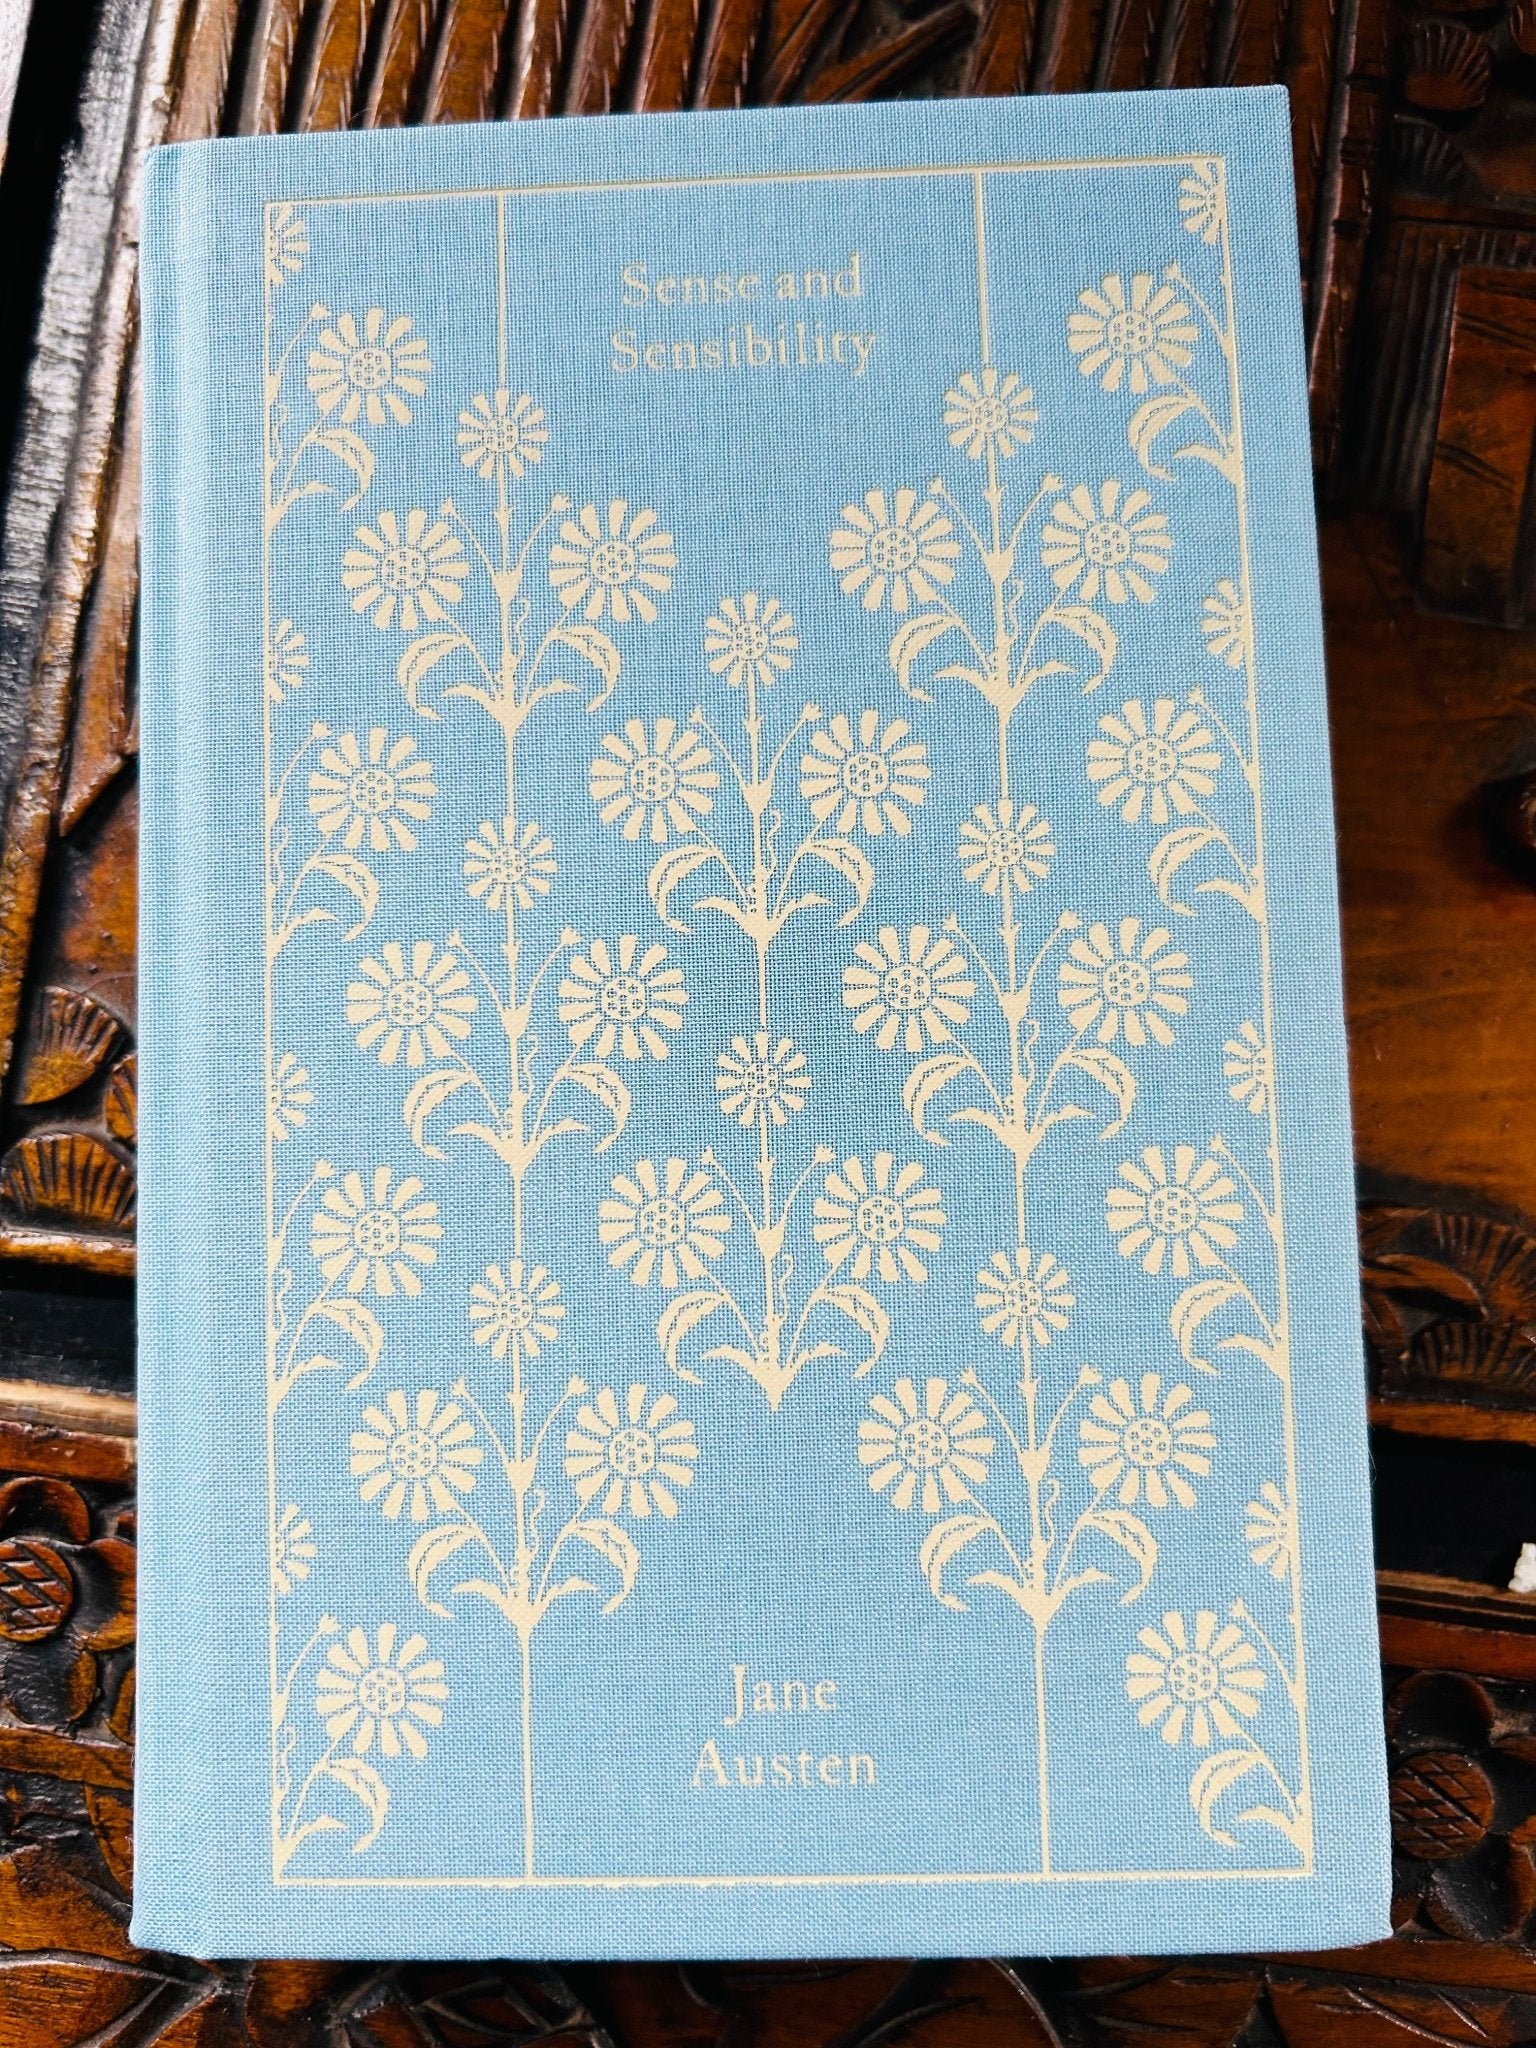 Sense and Sensibility by Jane Austen - Penguin Clothbound Edition - Looking Glass Books -